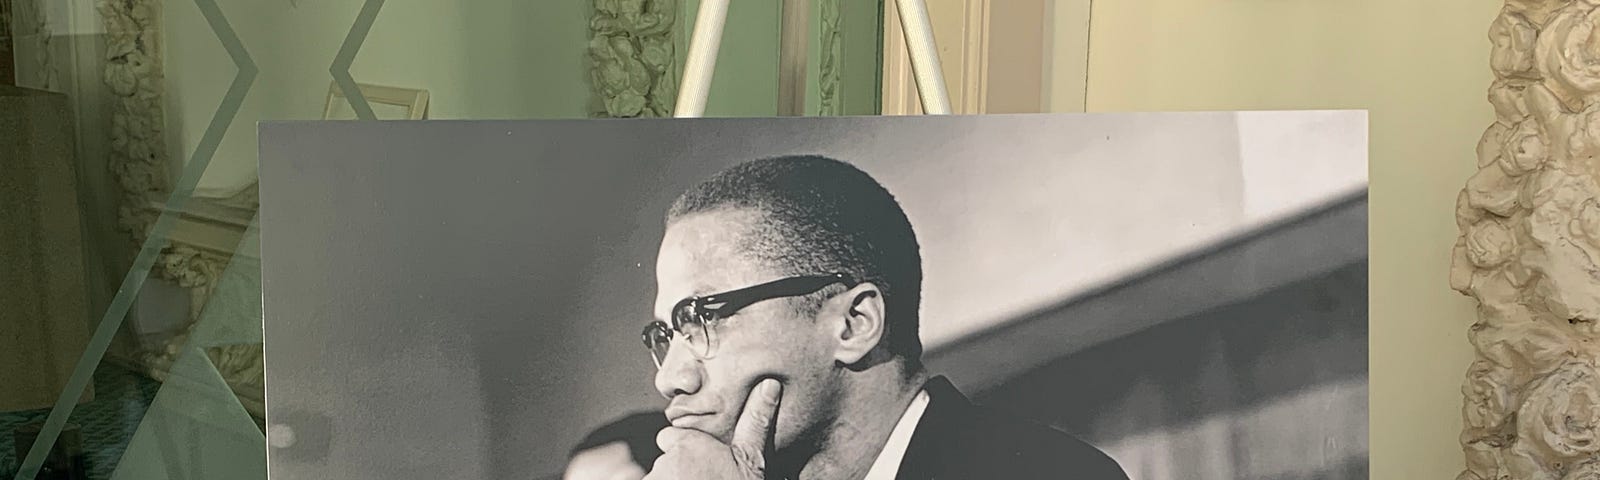 A picture of Malcolm X on an easel.